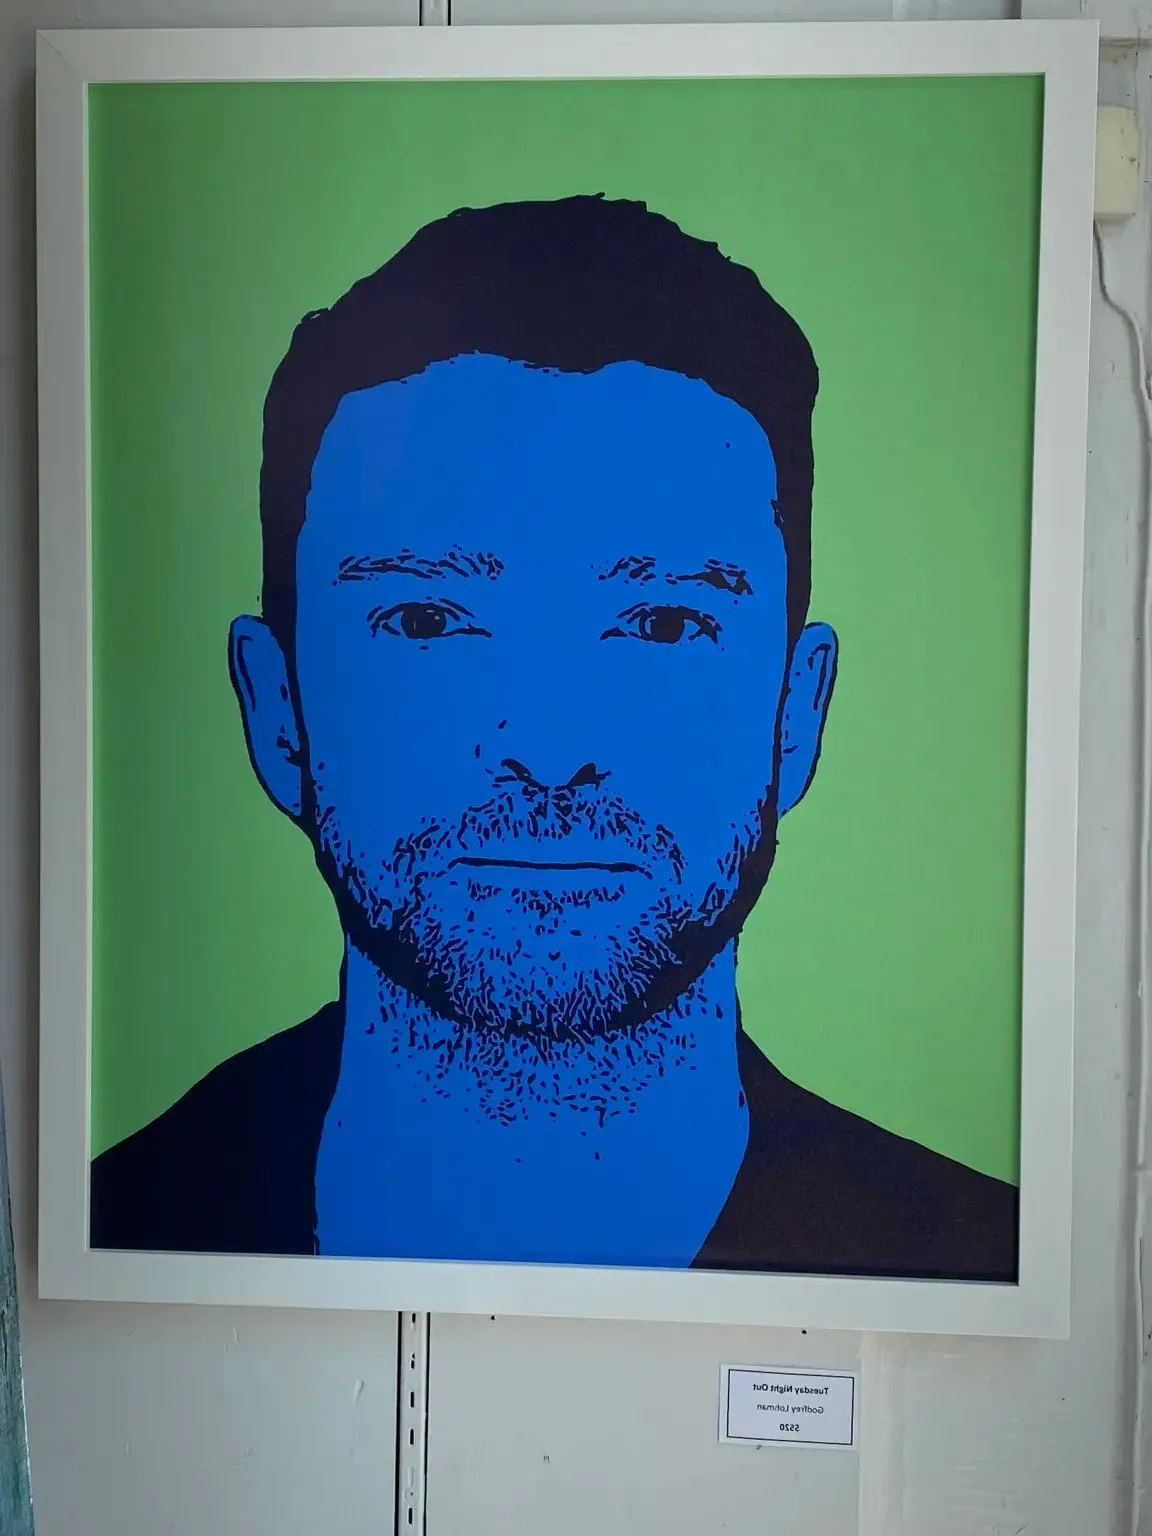 Justin Timberlake now has his own spot in a New York gallery after the drunk incident: Americans stand in line to see the masterpiece